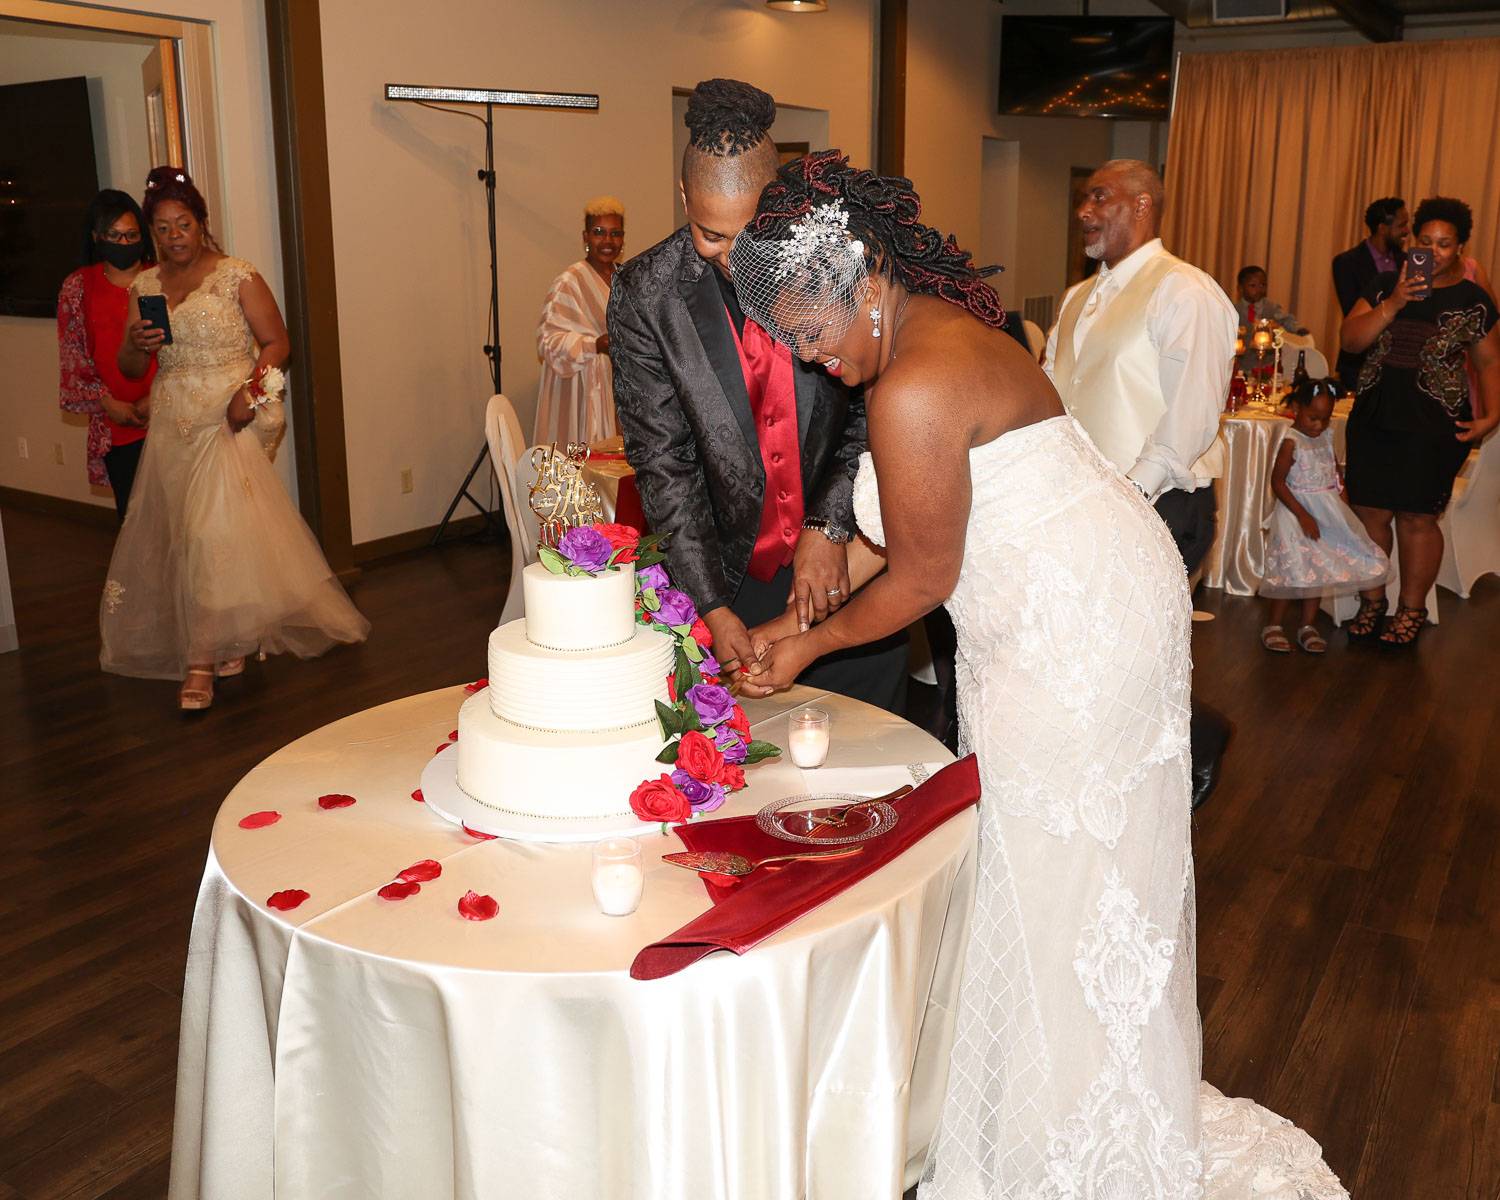 The newlyweds taking a slice